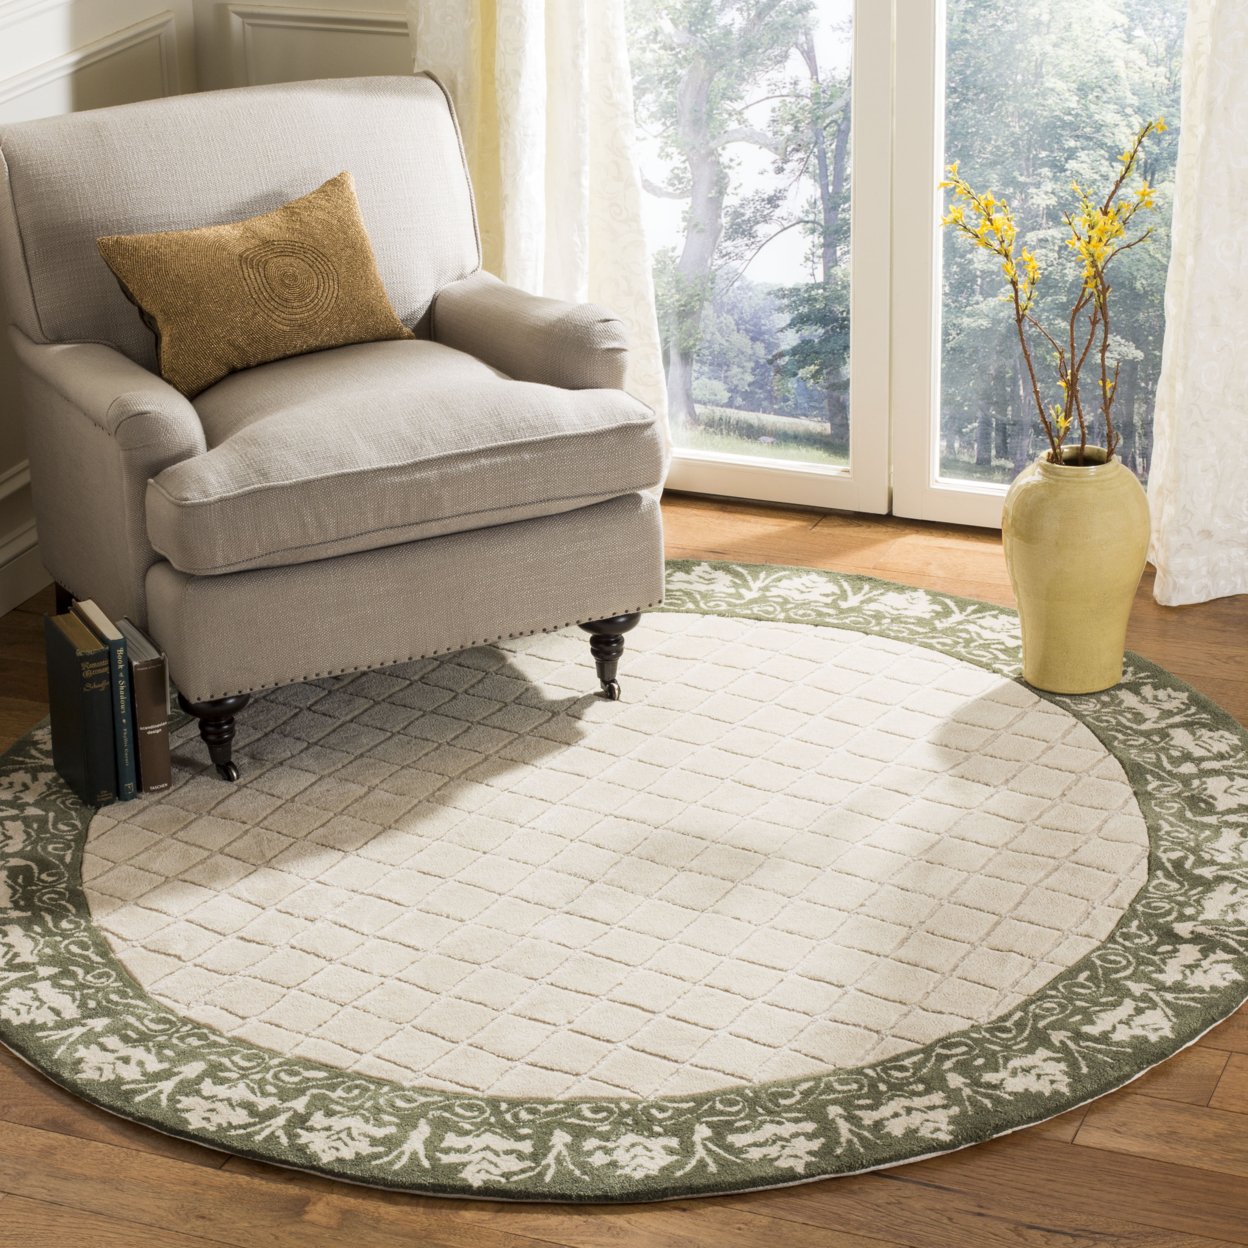 SAFAVIEH Total Performance TLP755A Ivory / Creme Rug - 8' Round